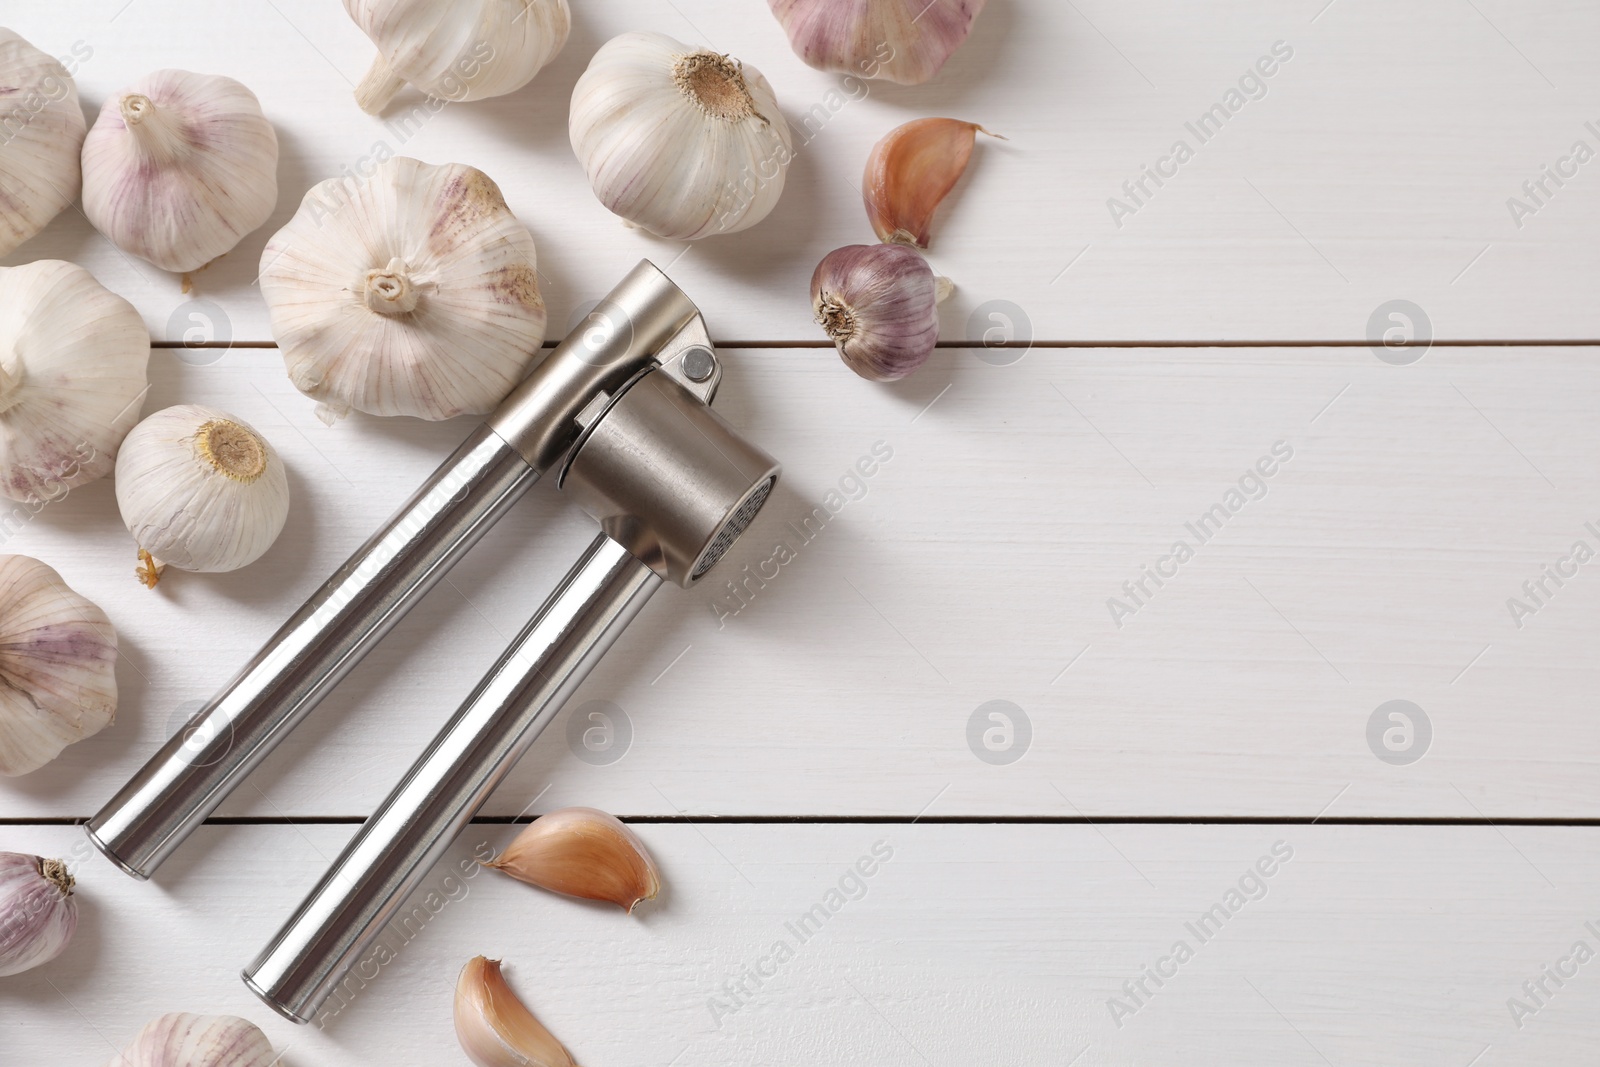 Photo of Metal press and garlic on white wooden table, flat lay. Space for text